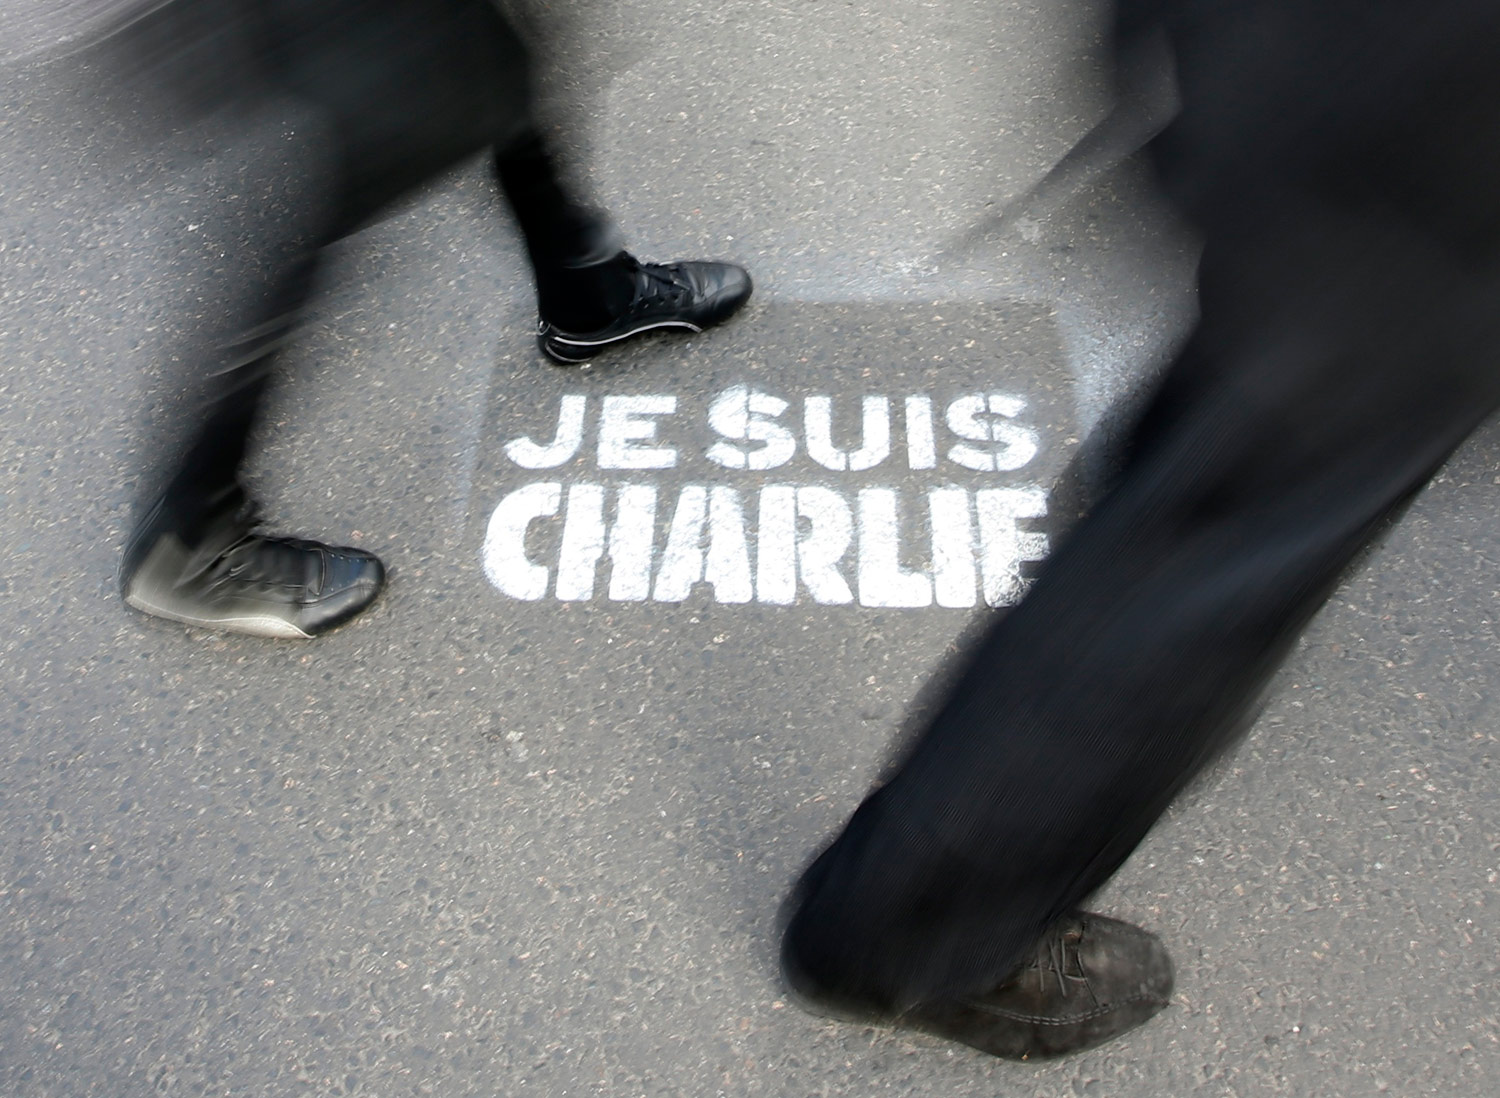 The Courage of ‘Charlie Hebdo’